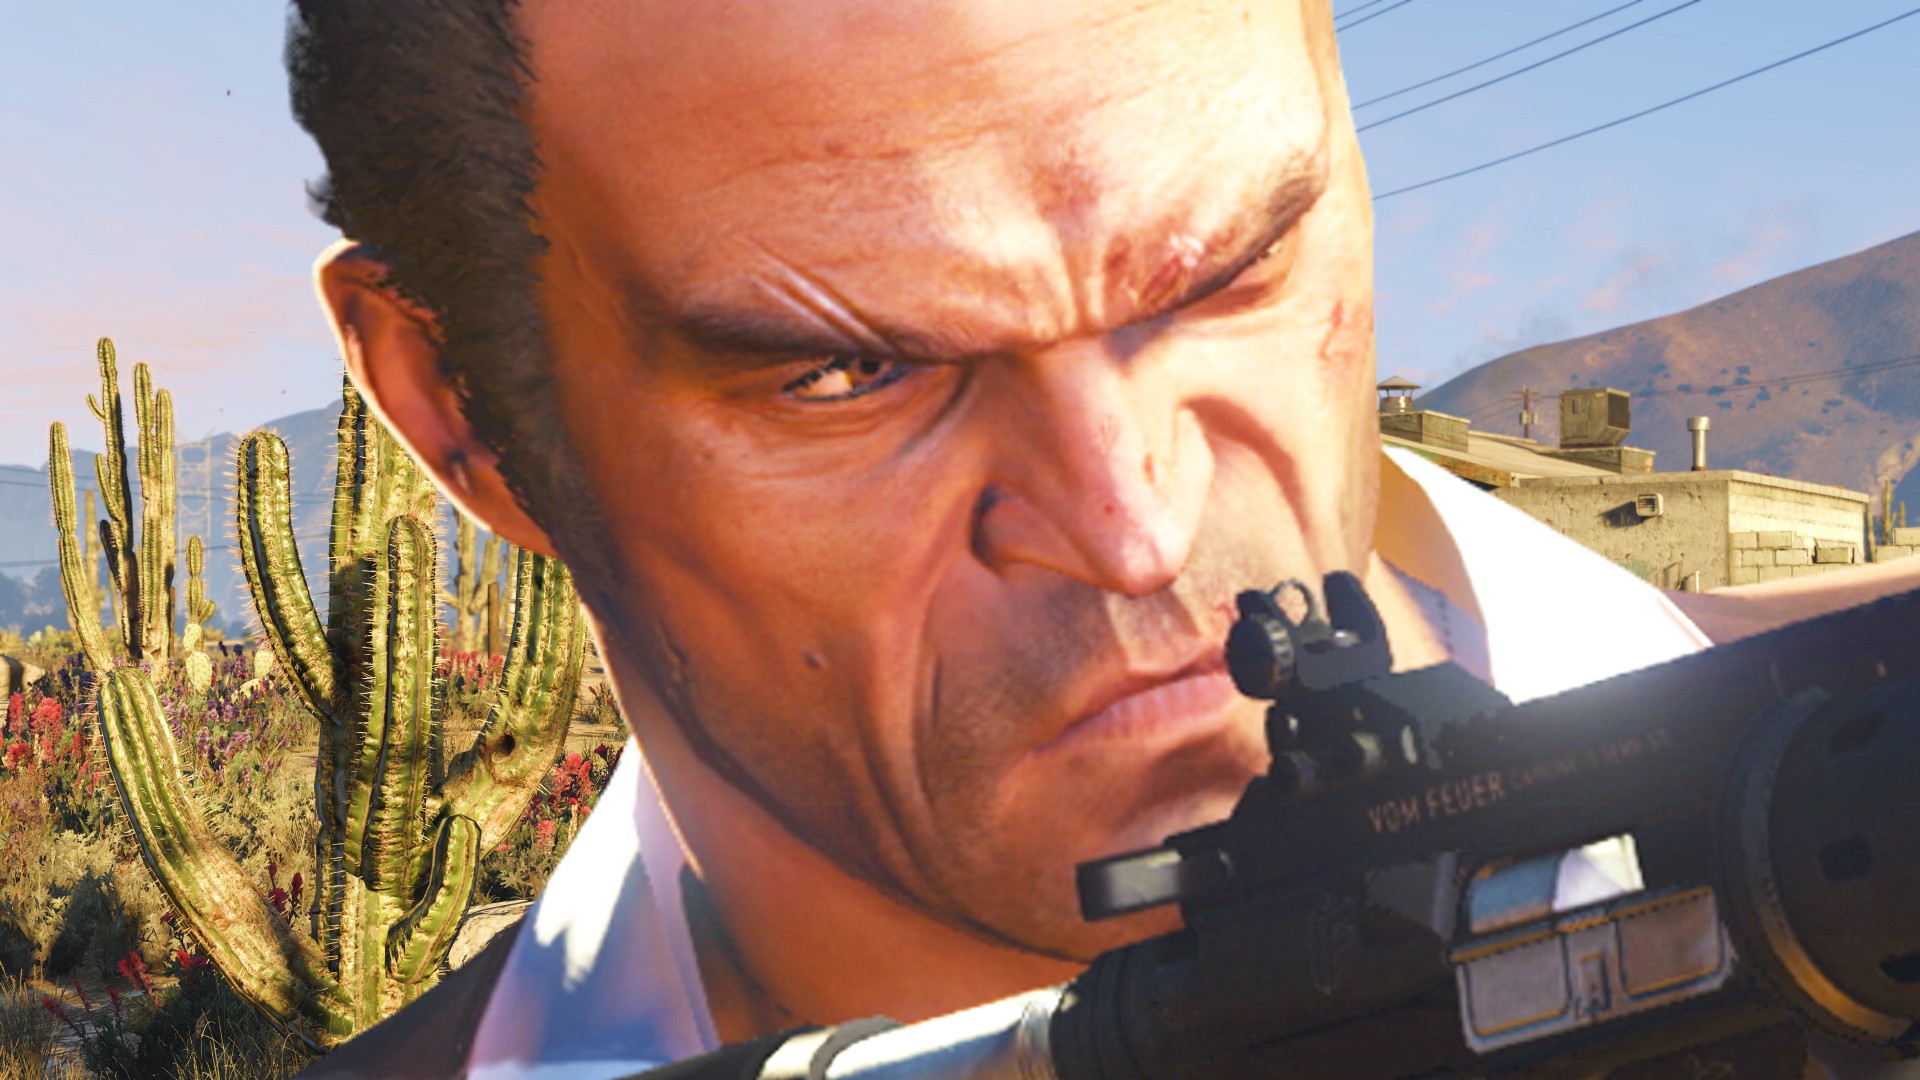 Gamers are being very weird about GTA 6's main character